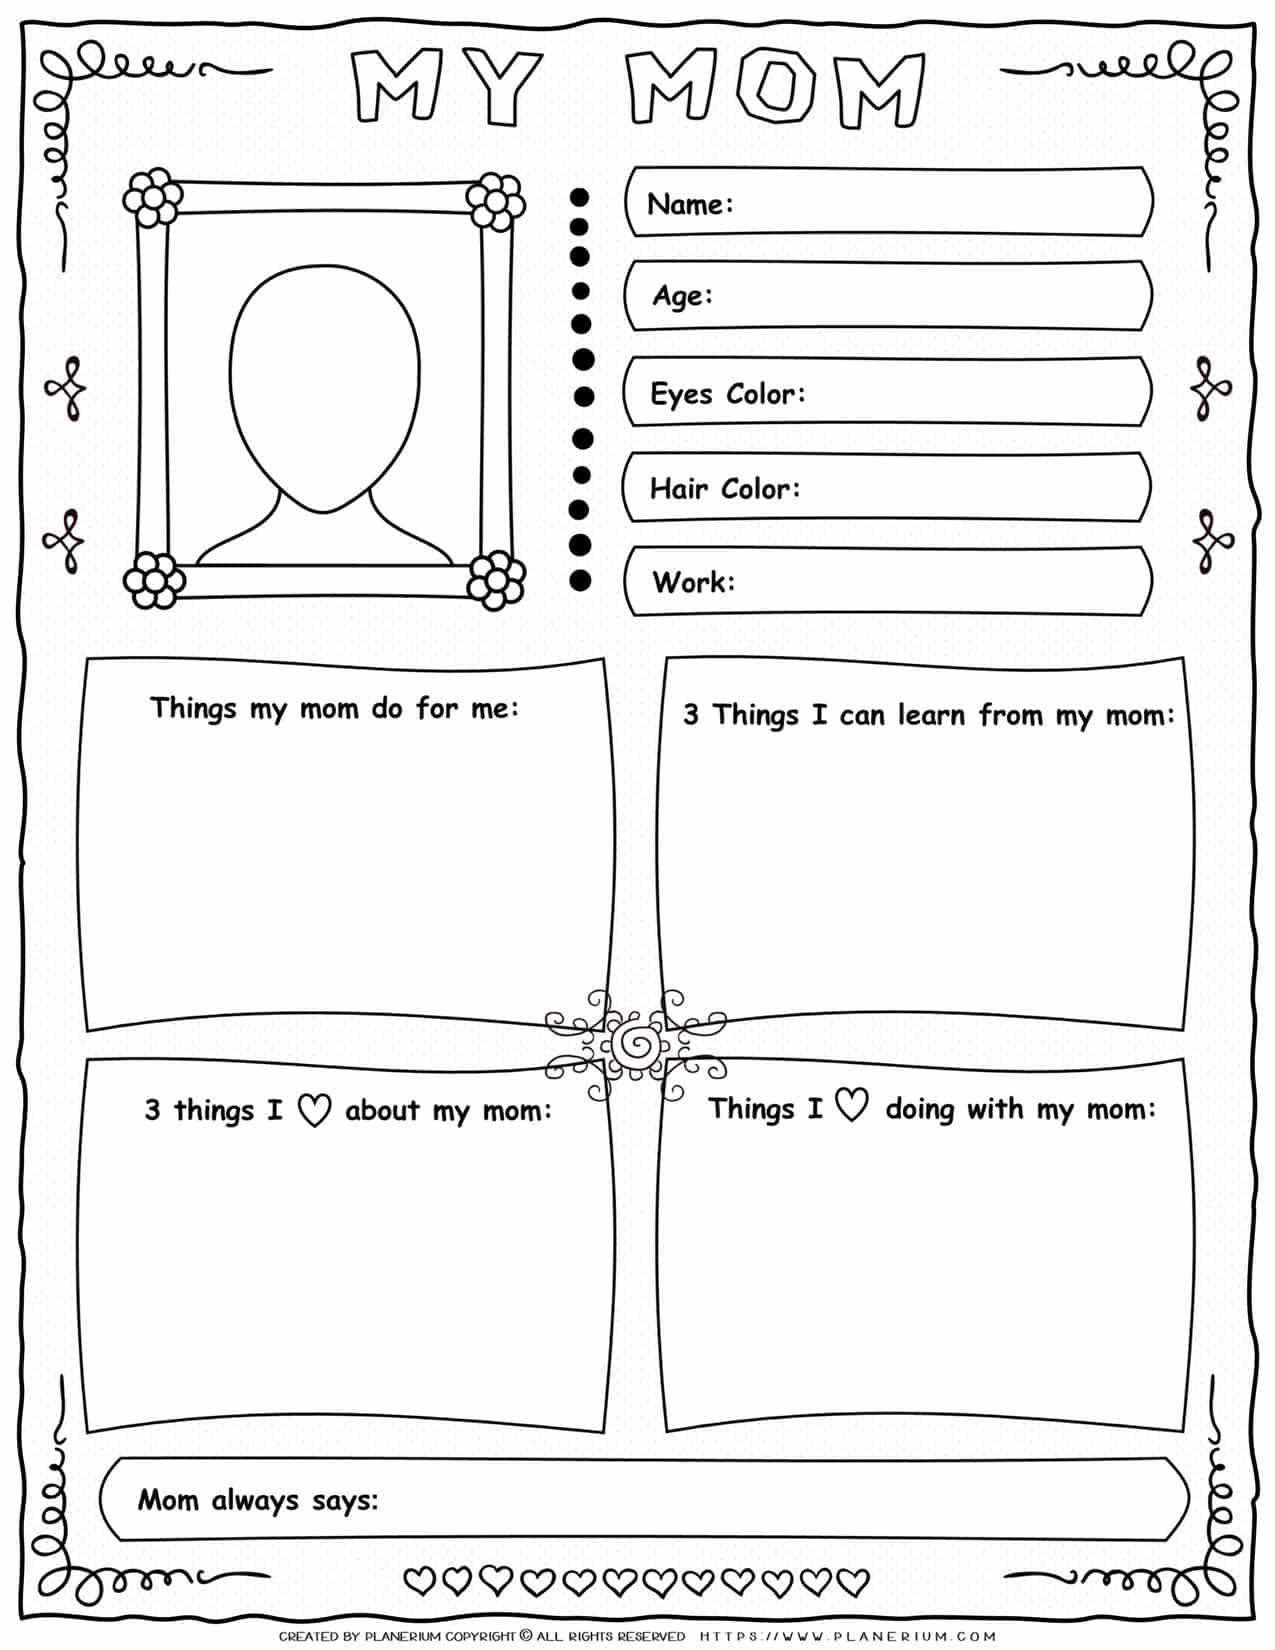 Mother's Day Worksheet - My Mom | Planerium